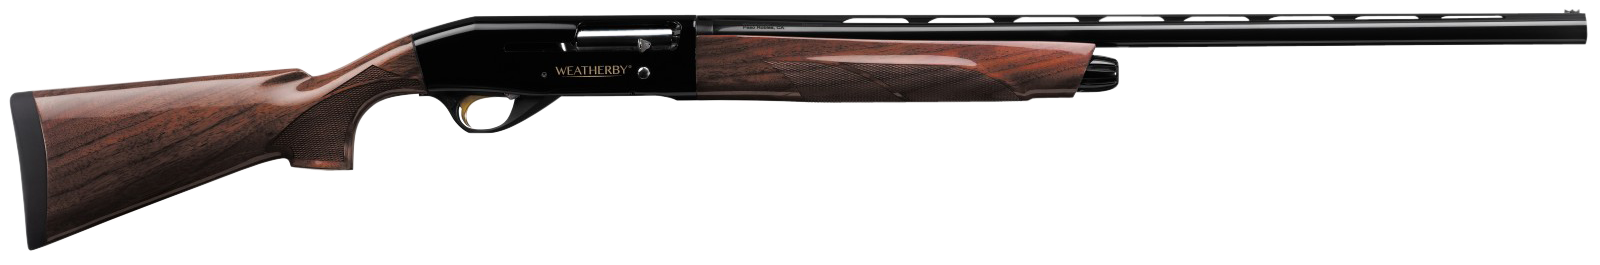 Image of WEATHERBY ELEMENT DELUXE